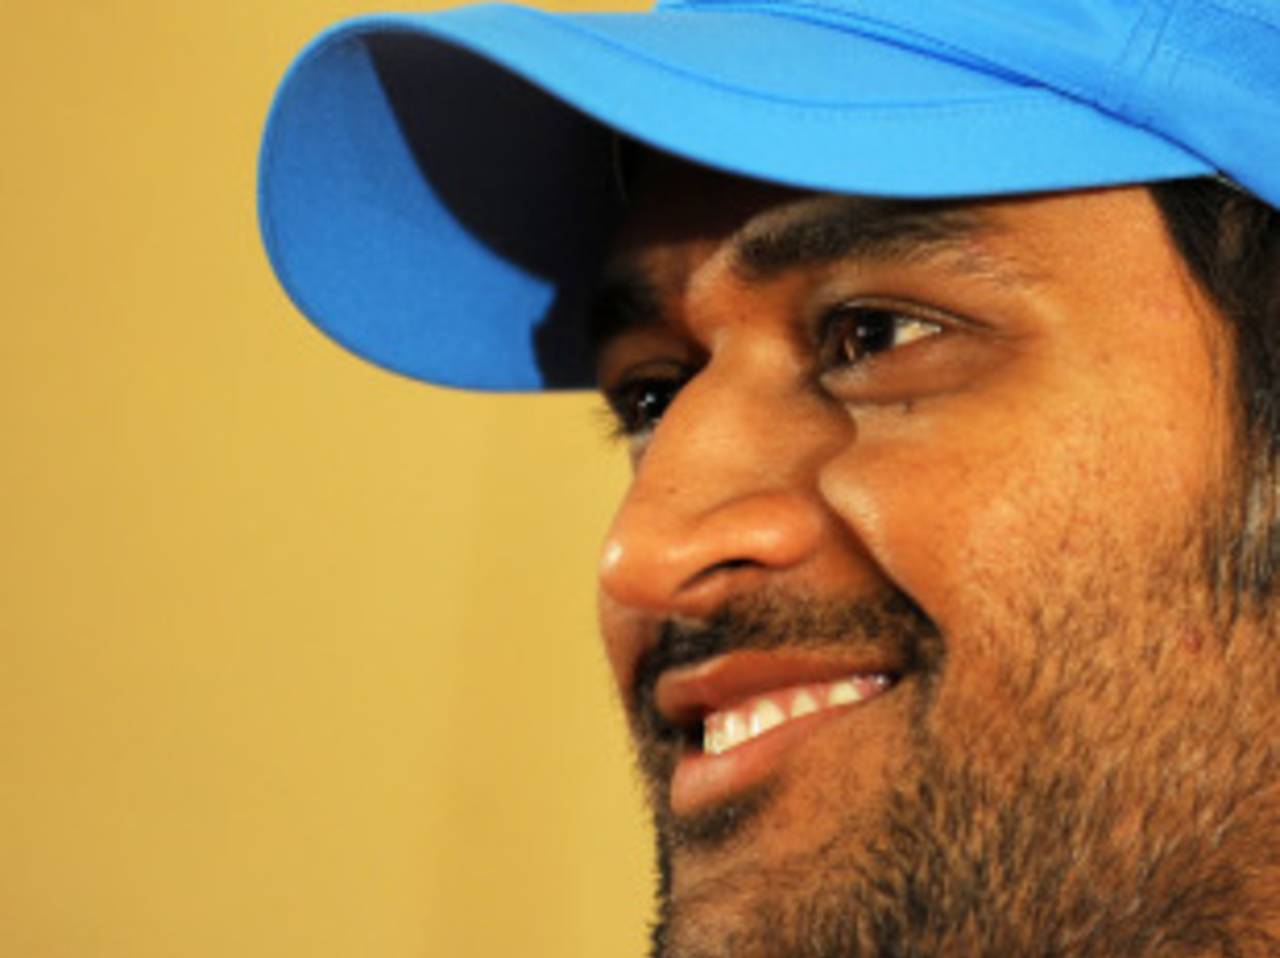 With earnings of $10 million, MS Dhoni was the world's highest paid cricketer last year&nbsp;&nbsp;&bull;&nbsp;&nbsp;AFP